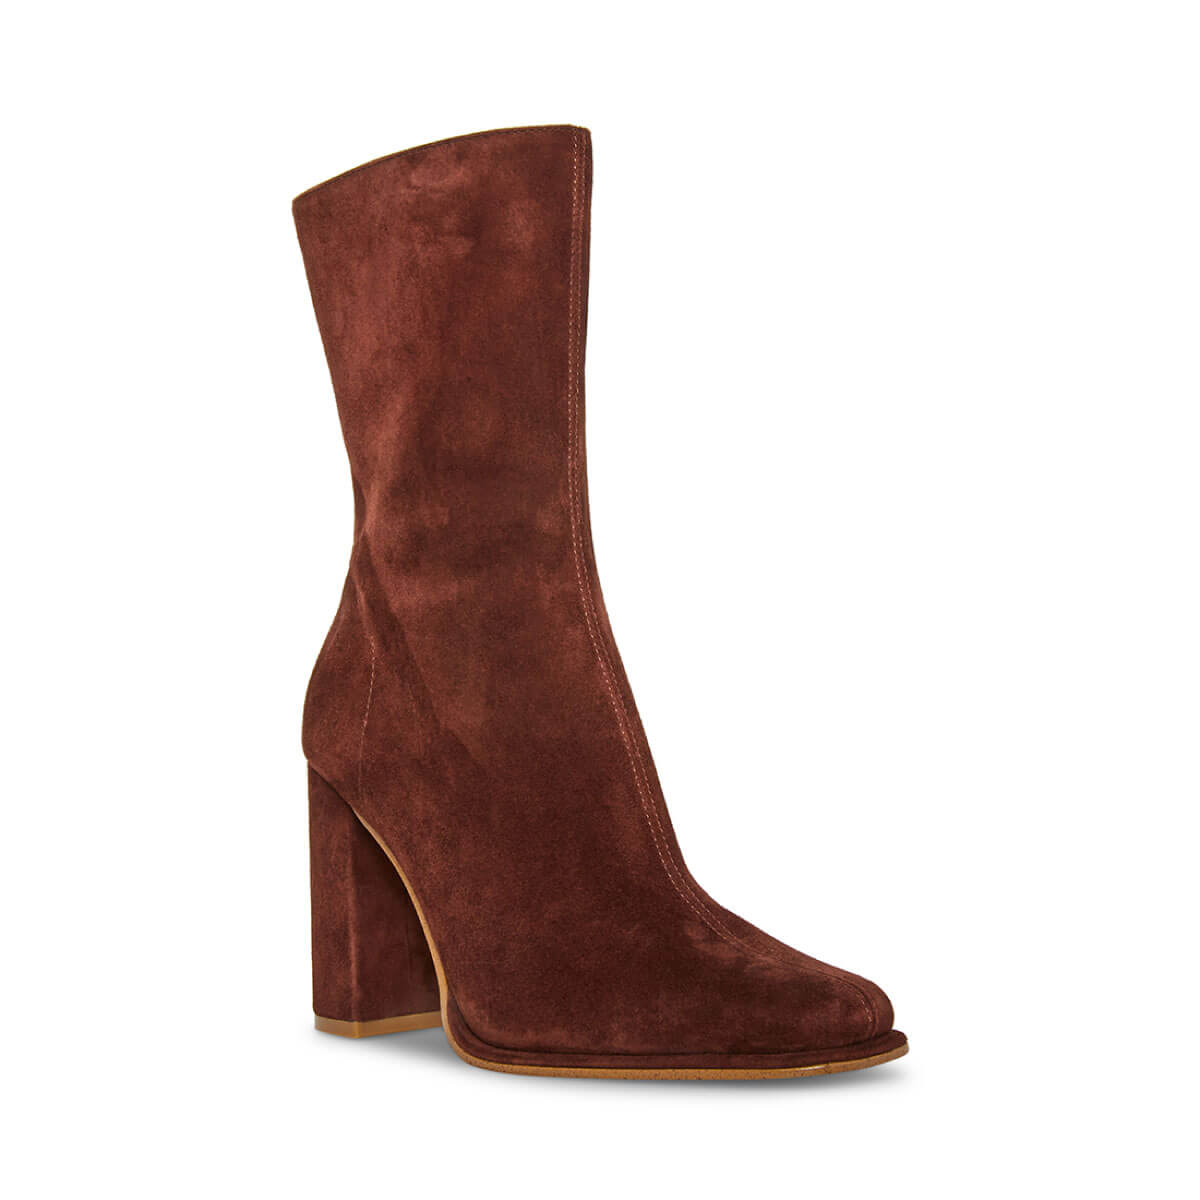 Steve Madden Lockwood Suede Boots brown side | MILK MONEY milkmoney.co | cute shoes for women. ladies shoes. nice shoes for women. footwear for women. ladies shoes online. ladies footwear. womens shoes and boots. pretty shoes for women. beautiful shoes for women.